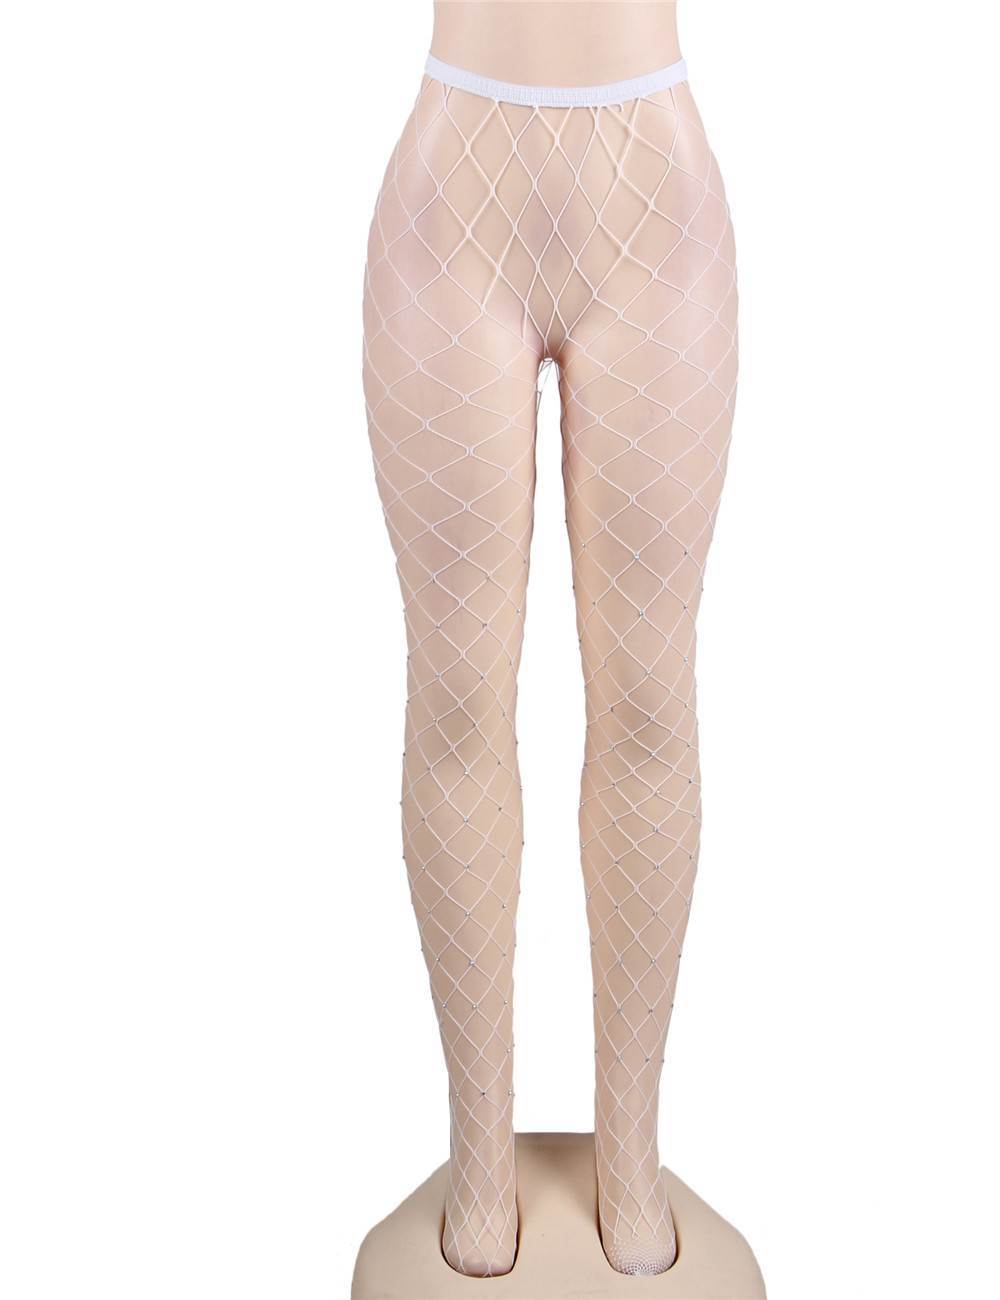 Rhinestone Net Pantyhose - One Size Fits Most - Lingerie